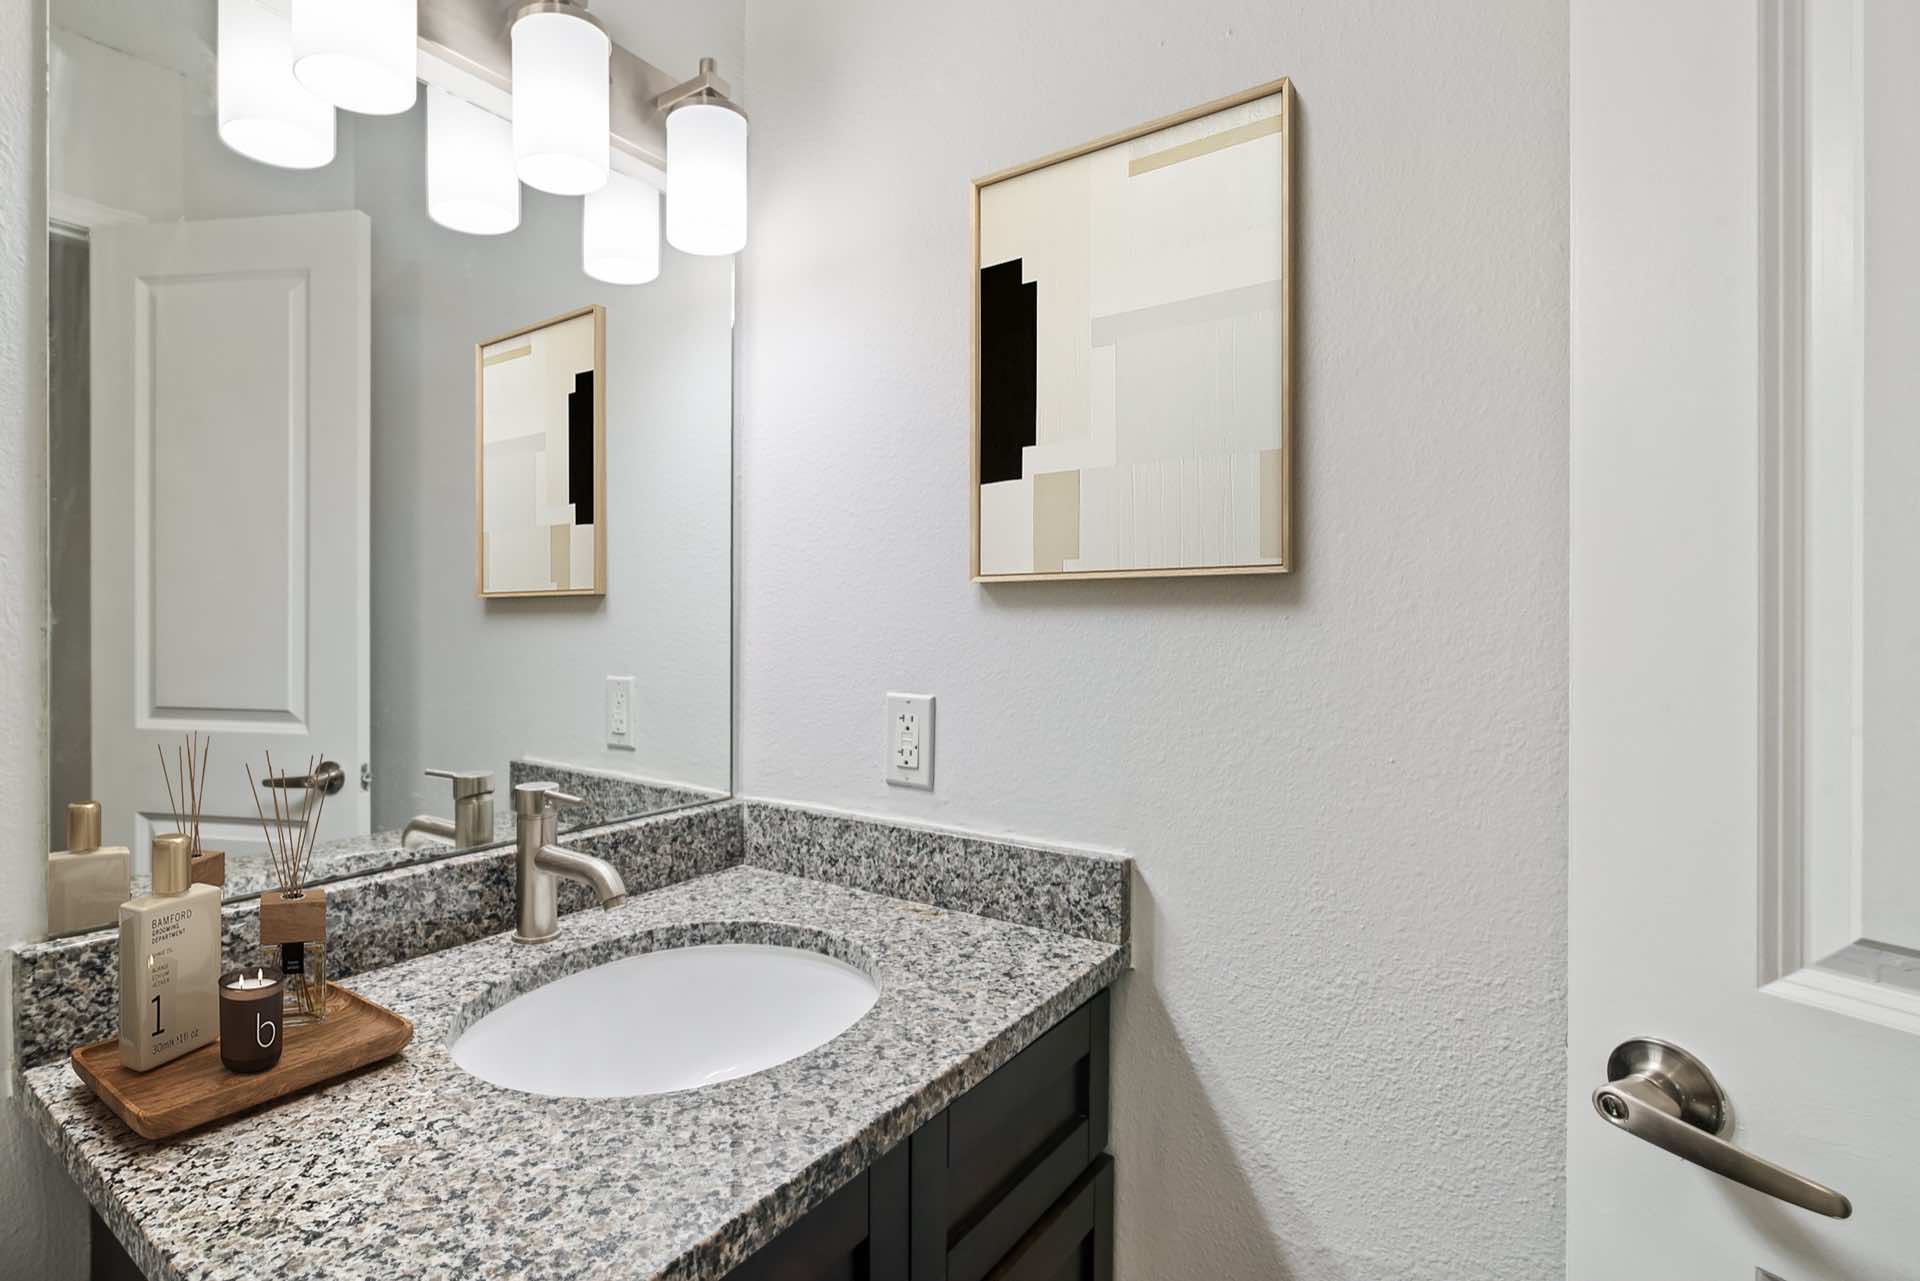 granite counters in bathroom and wall art